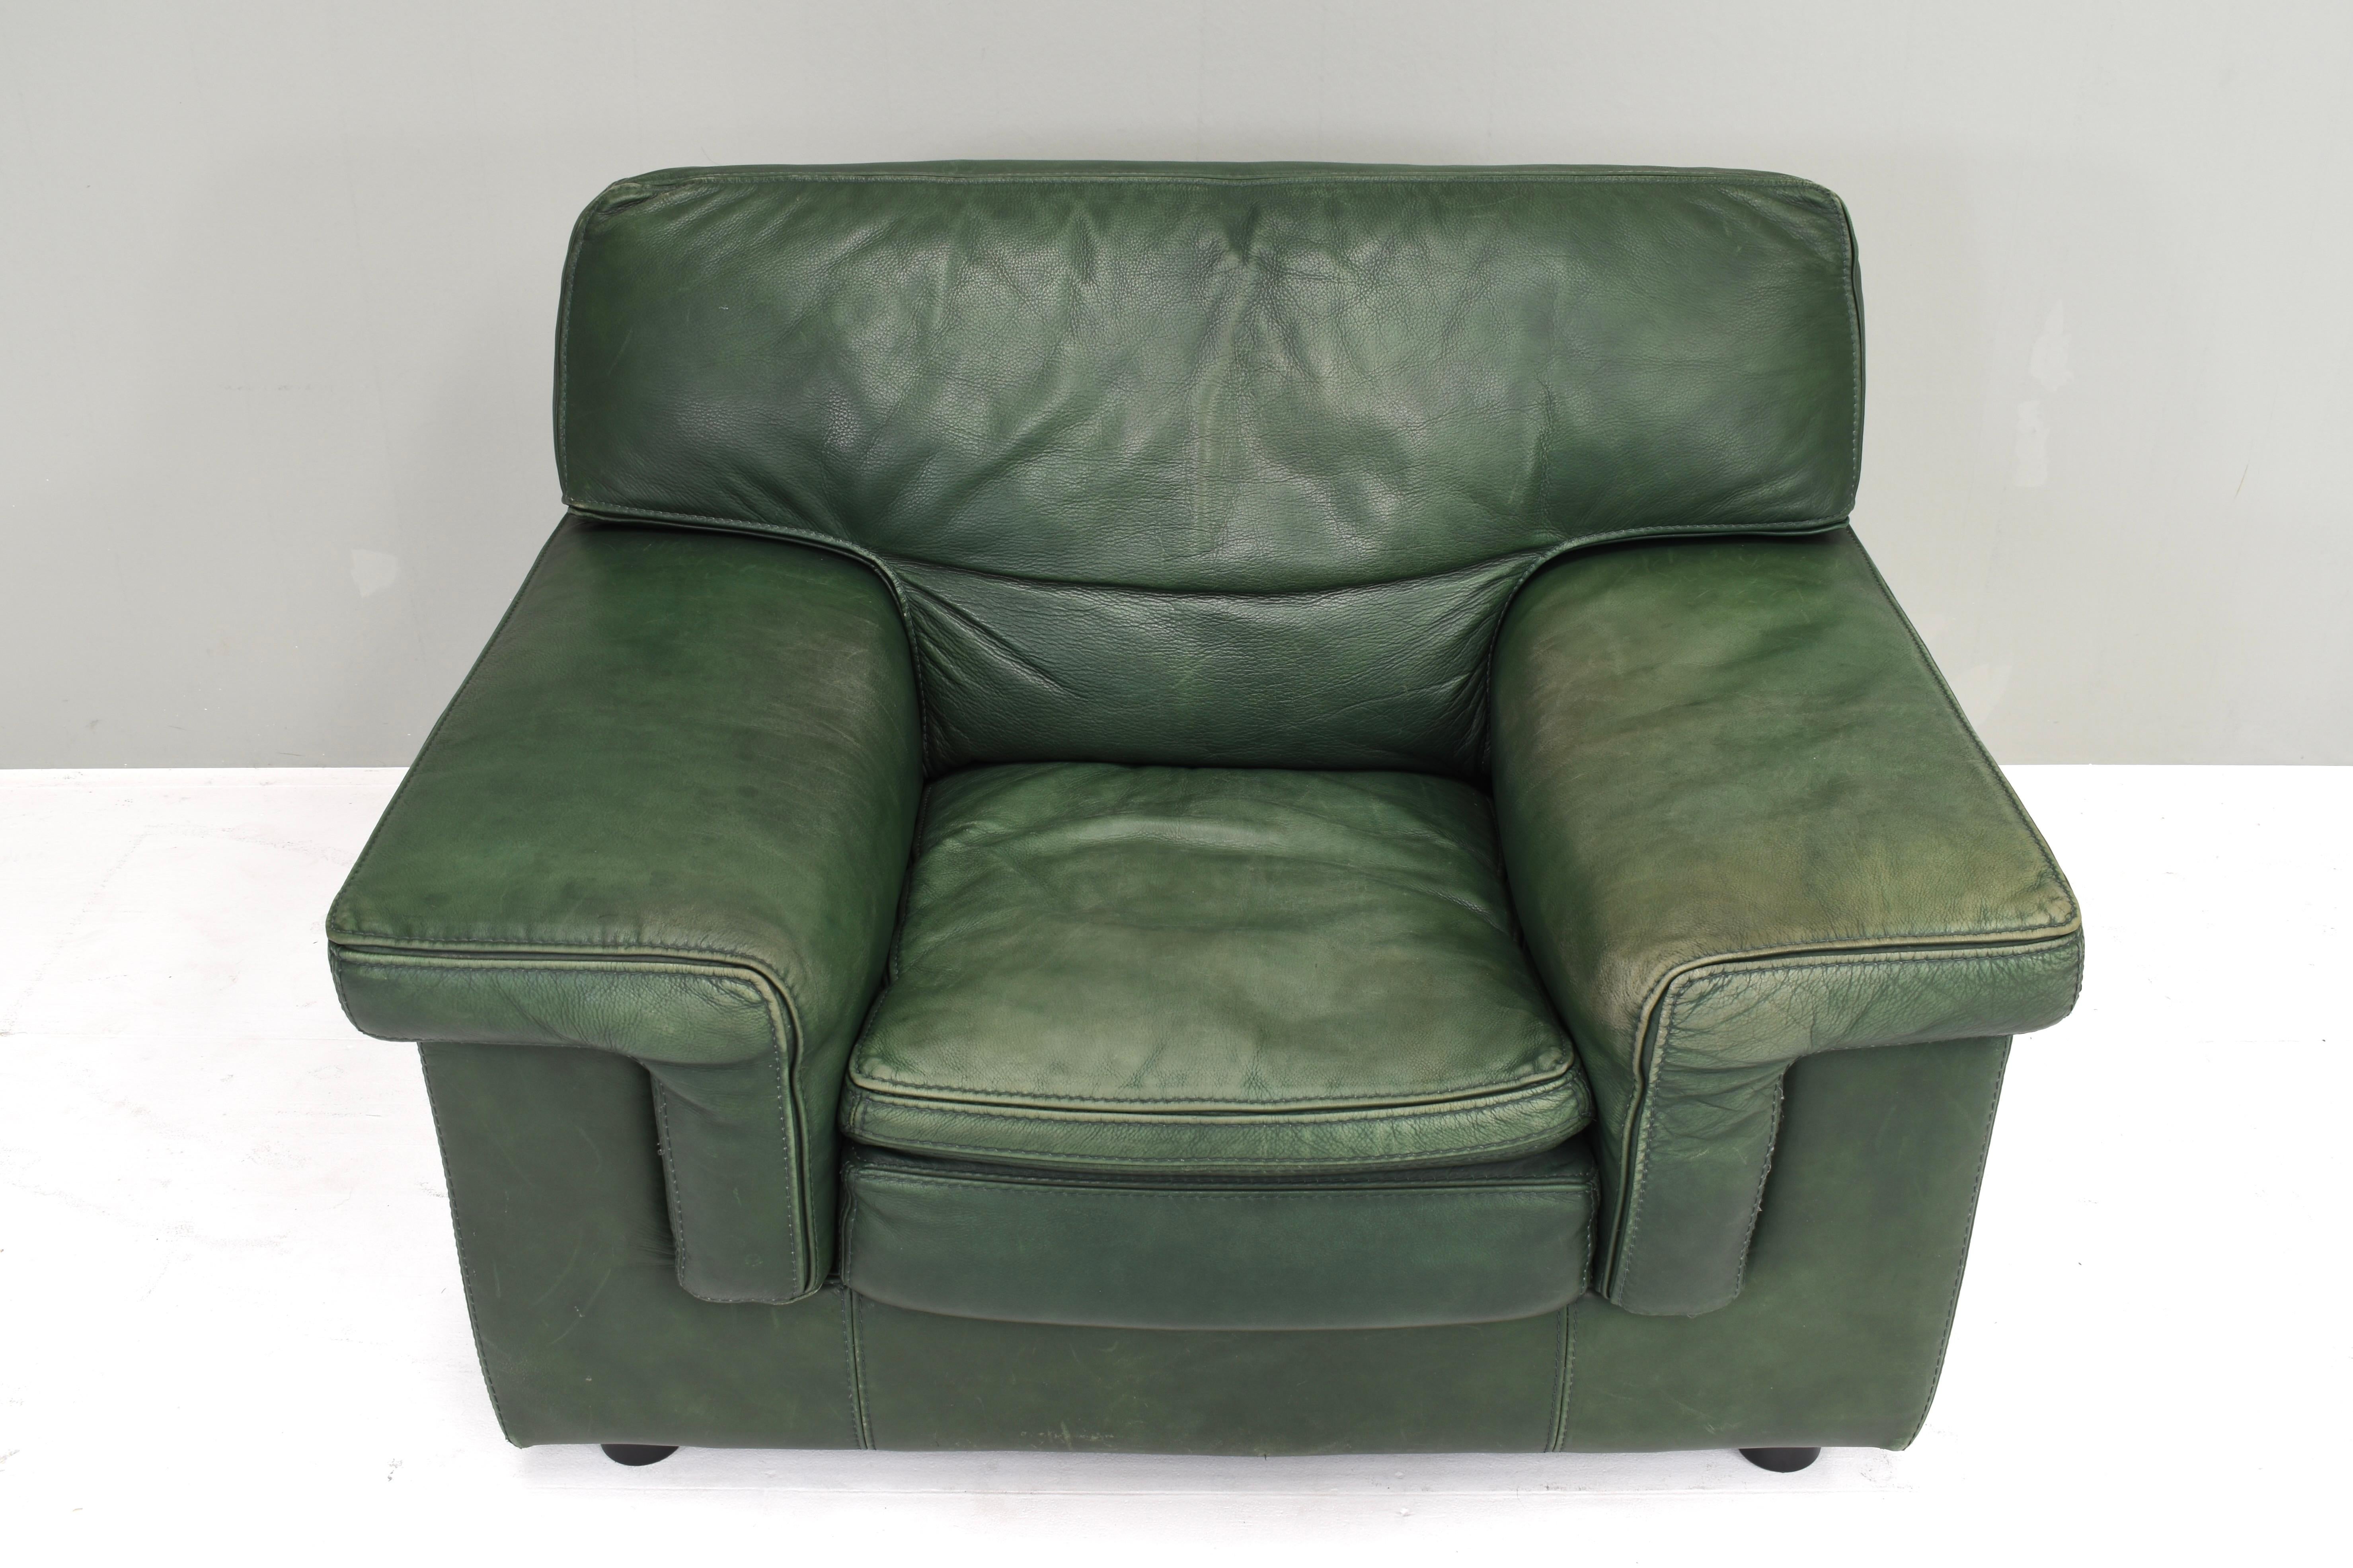 Roche Bobois Lounge Armchair in Original Green Patinated Leather – circa 1970 For Sale 2